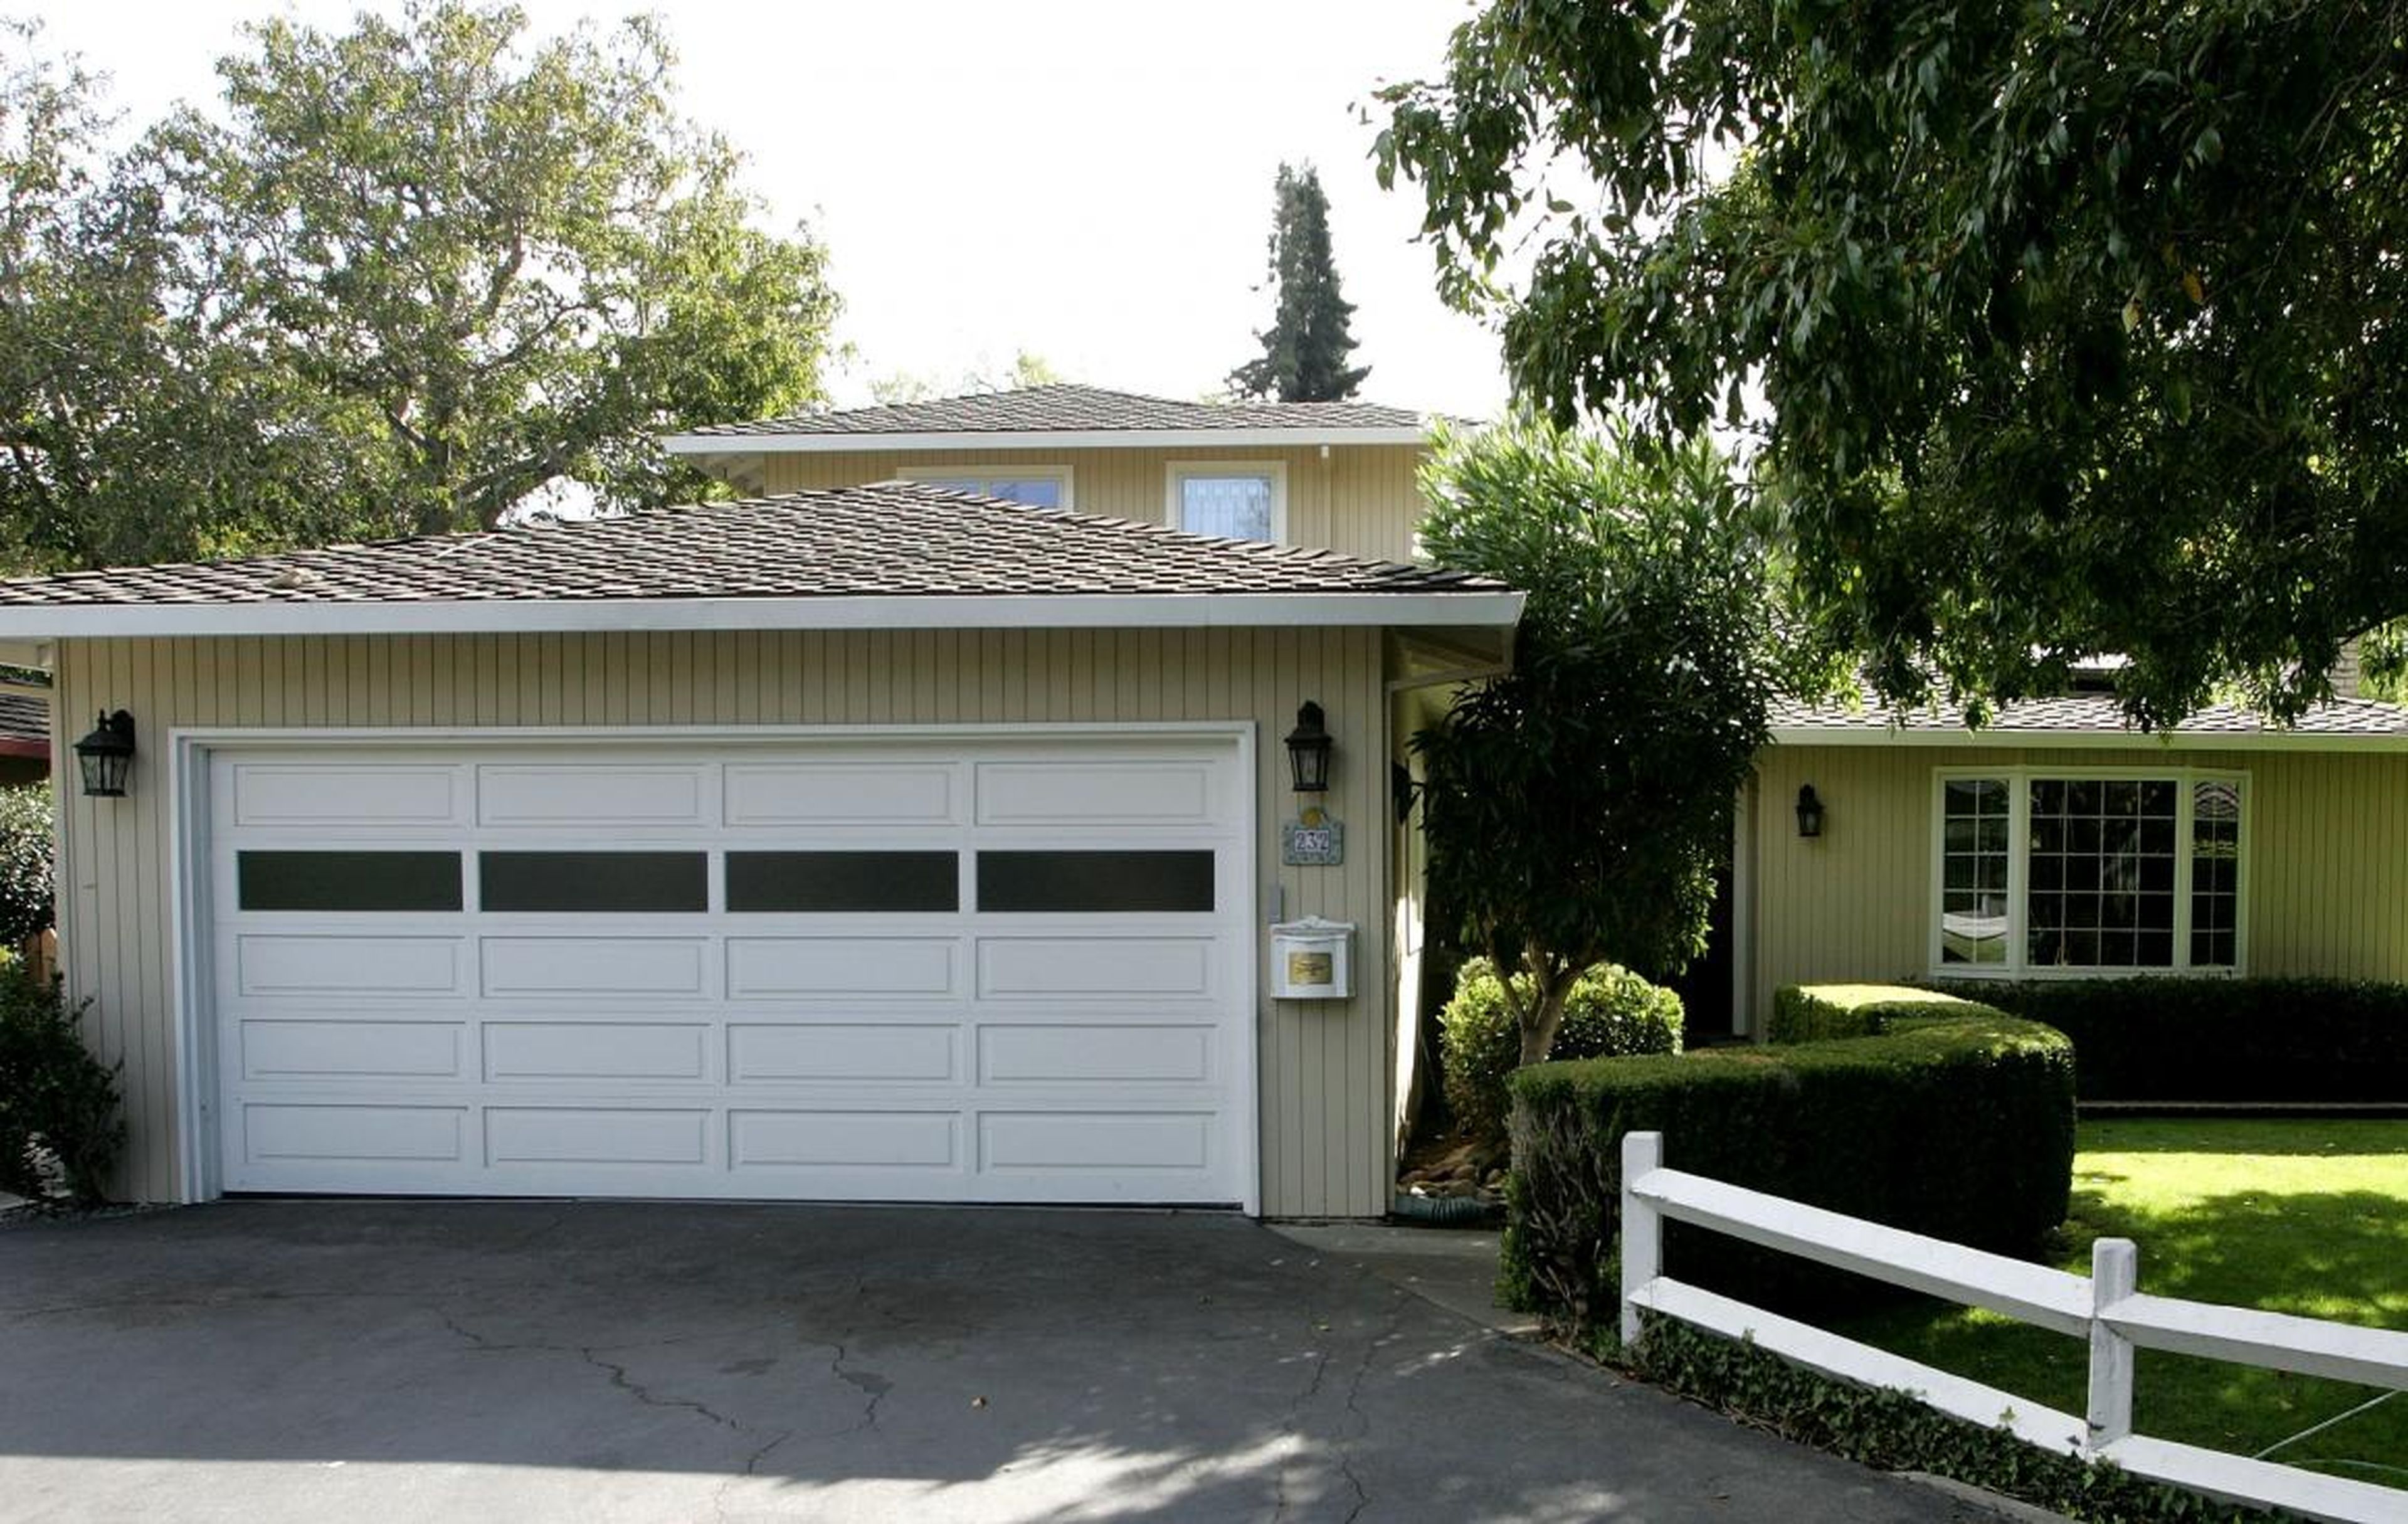 1. Google founders Larry Page and Sergey Brin rented this Menlo Park garage, where they started their search engine in 1998.